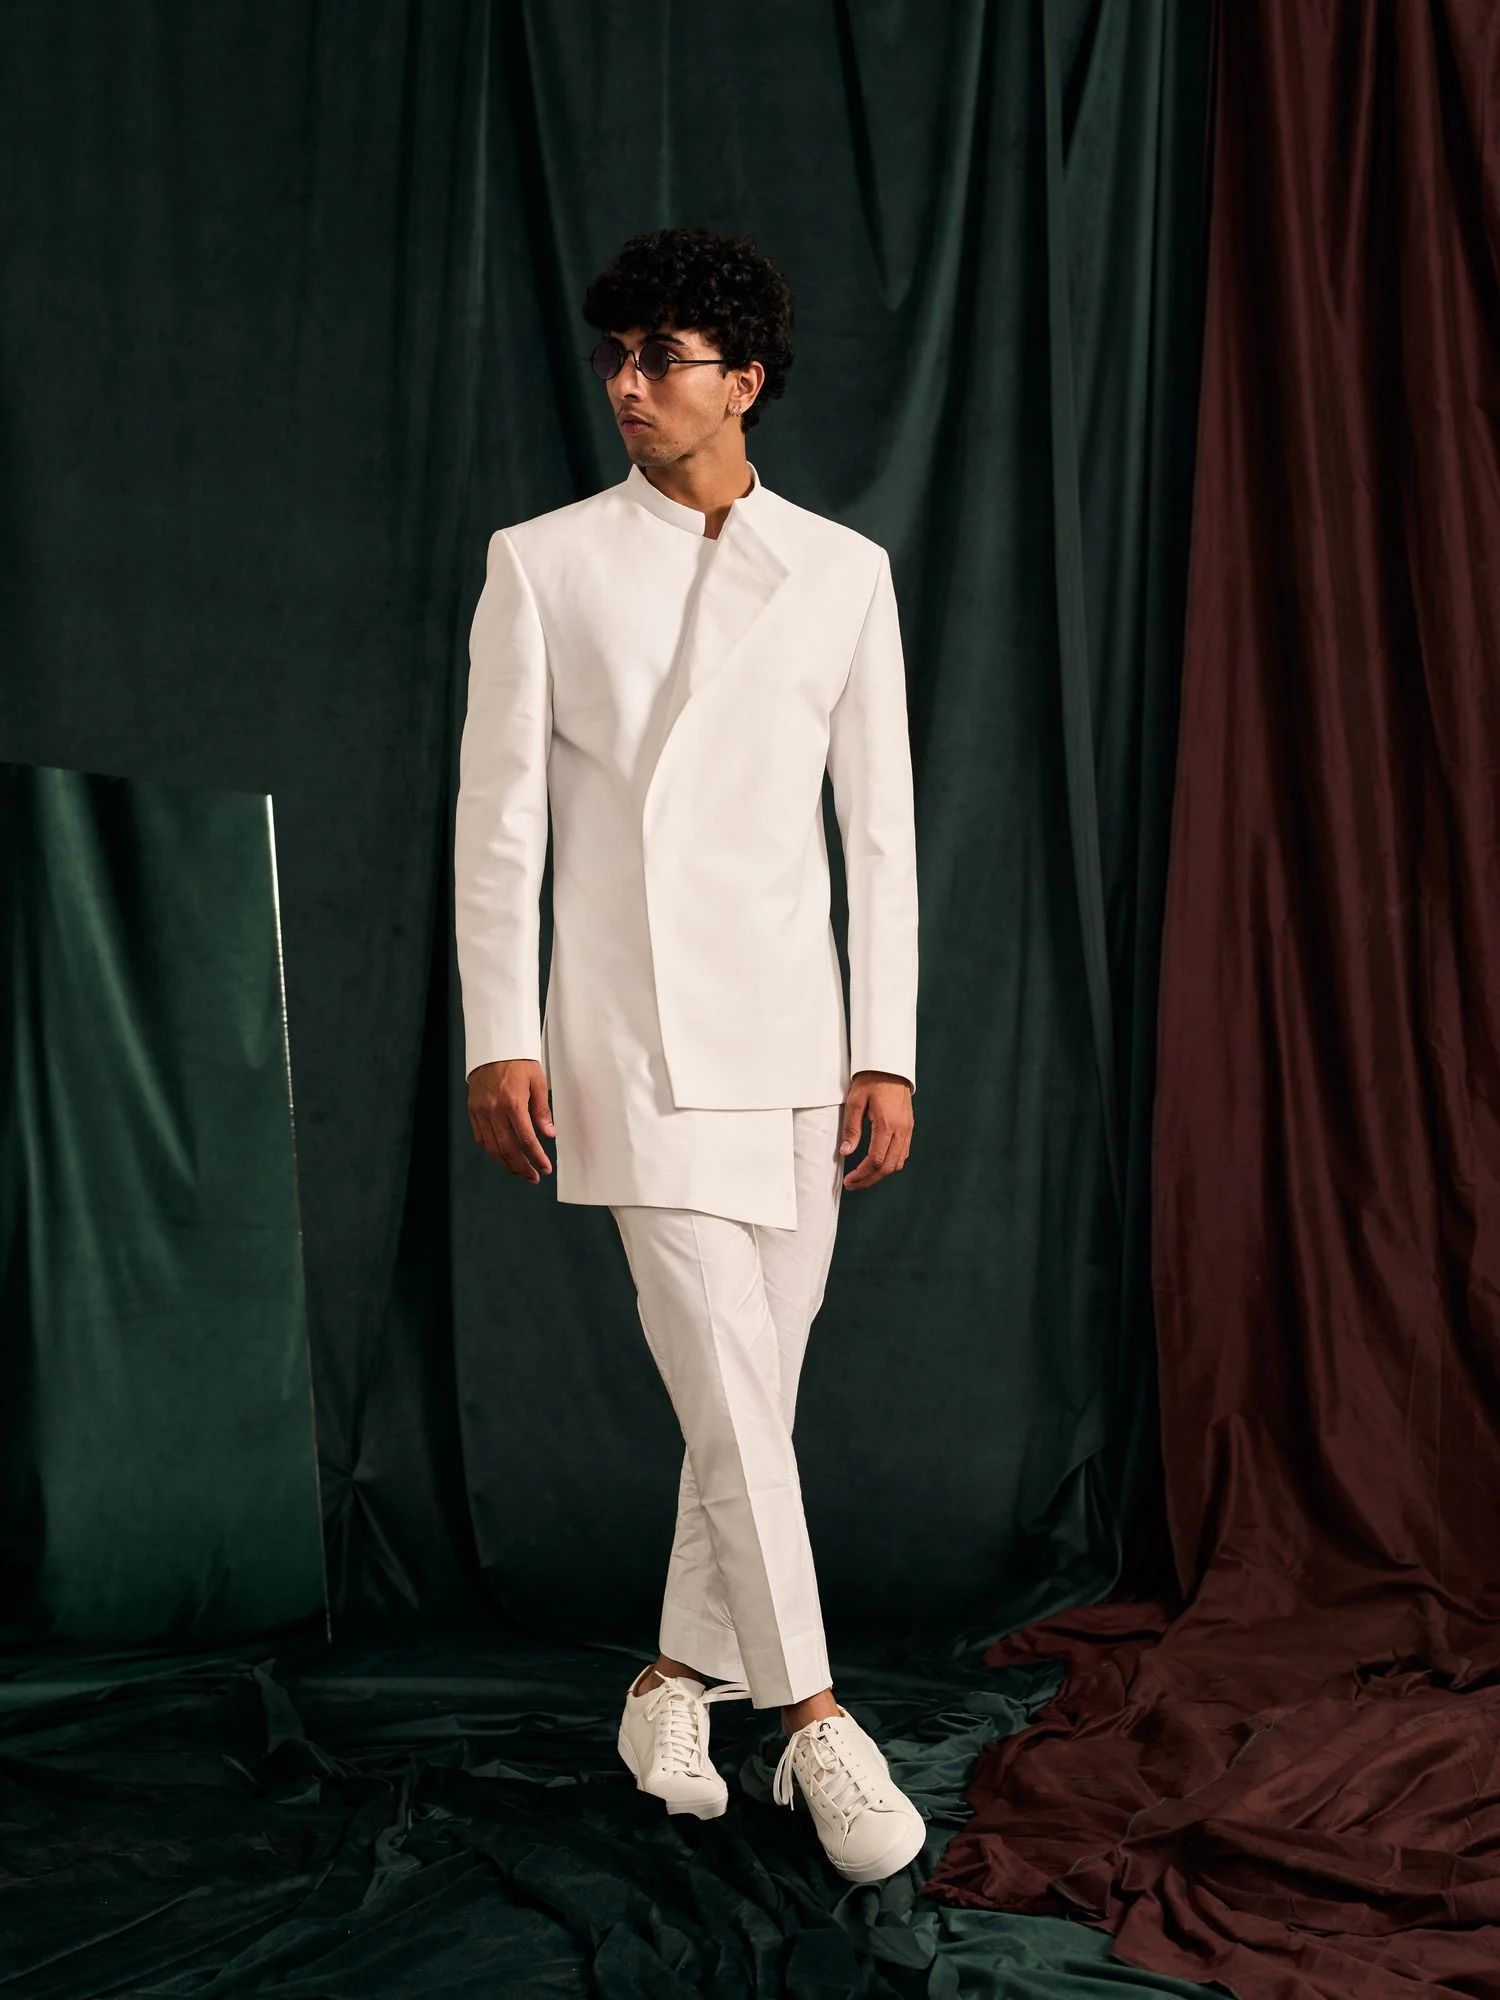 You are currently viewing Project Bandi: Men’s White Navratri day 2 Outfit Shining Bright with Style and Grace